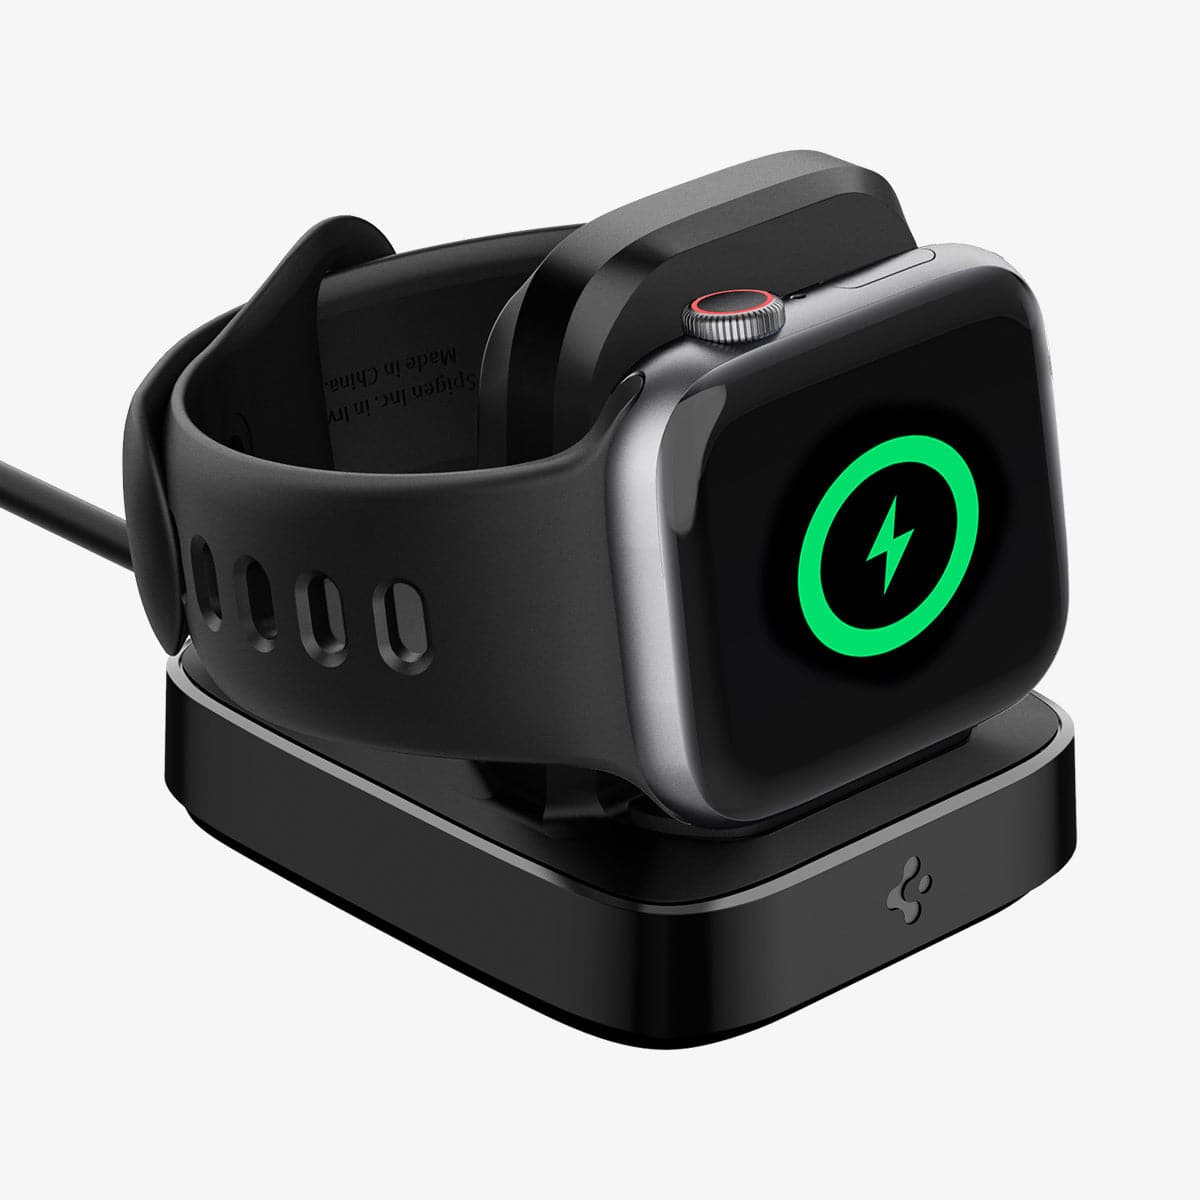 000CH25522 - Apple Watch ArcField™ Wireless Charger PF2002 in black showing the front, side and top with apple watch charging on stand